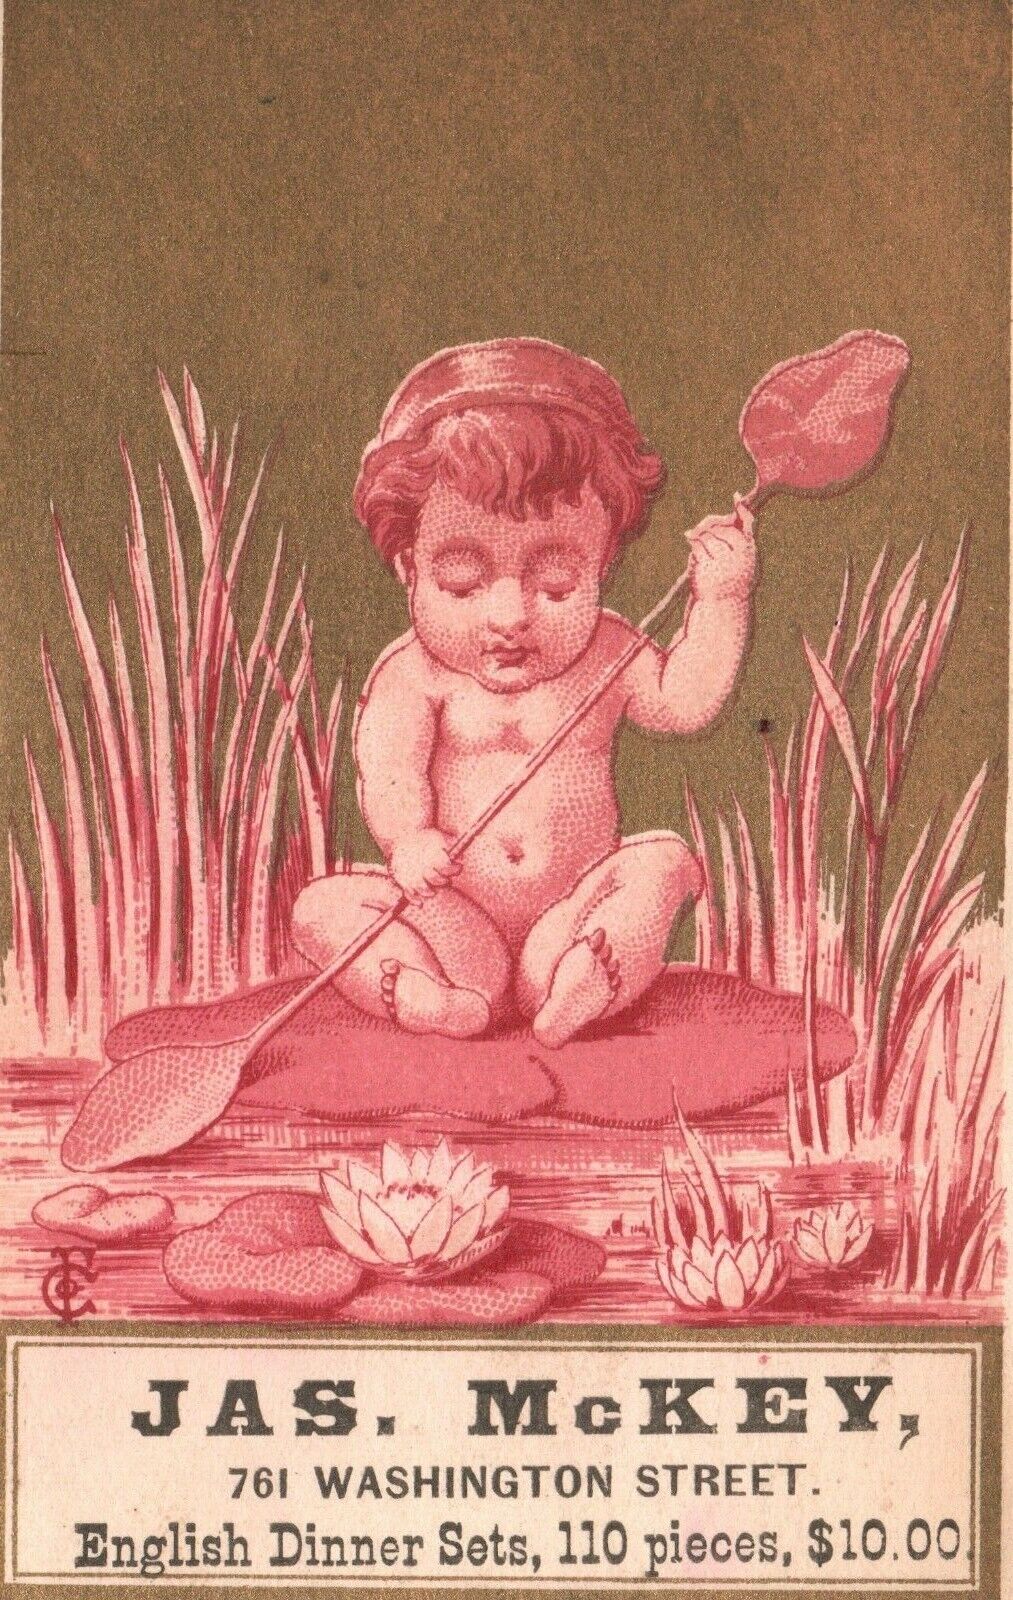 1880s-90s Small Boy in Lilly Patch JAS McKey English Dinner Sets Trade Card